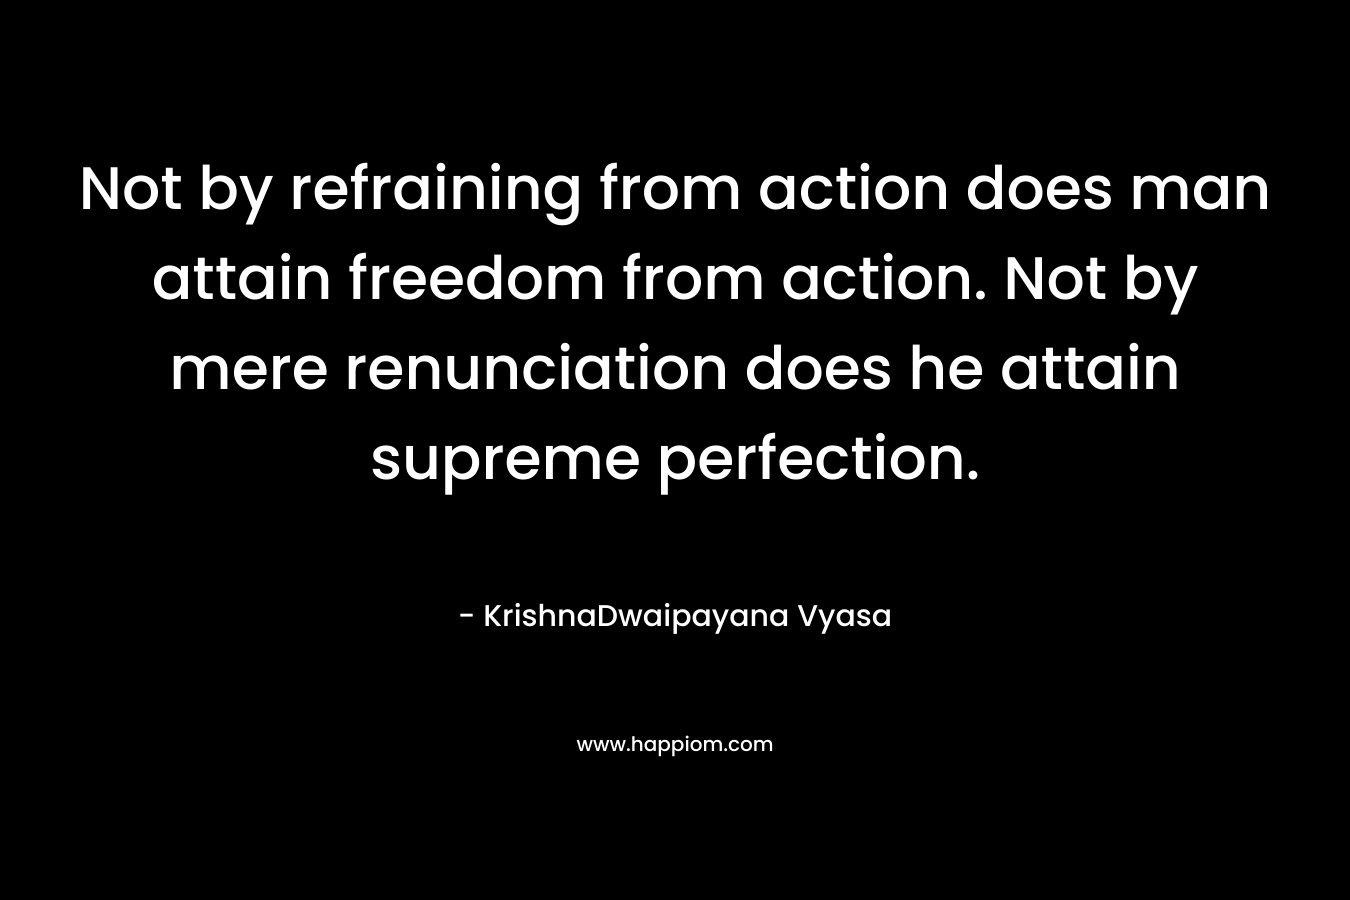 Not by refraining from action does man attain freedom from action. Not by mere renunciation does he attain supreme perfection. – KrishnaDwaipayana Vyasa